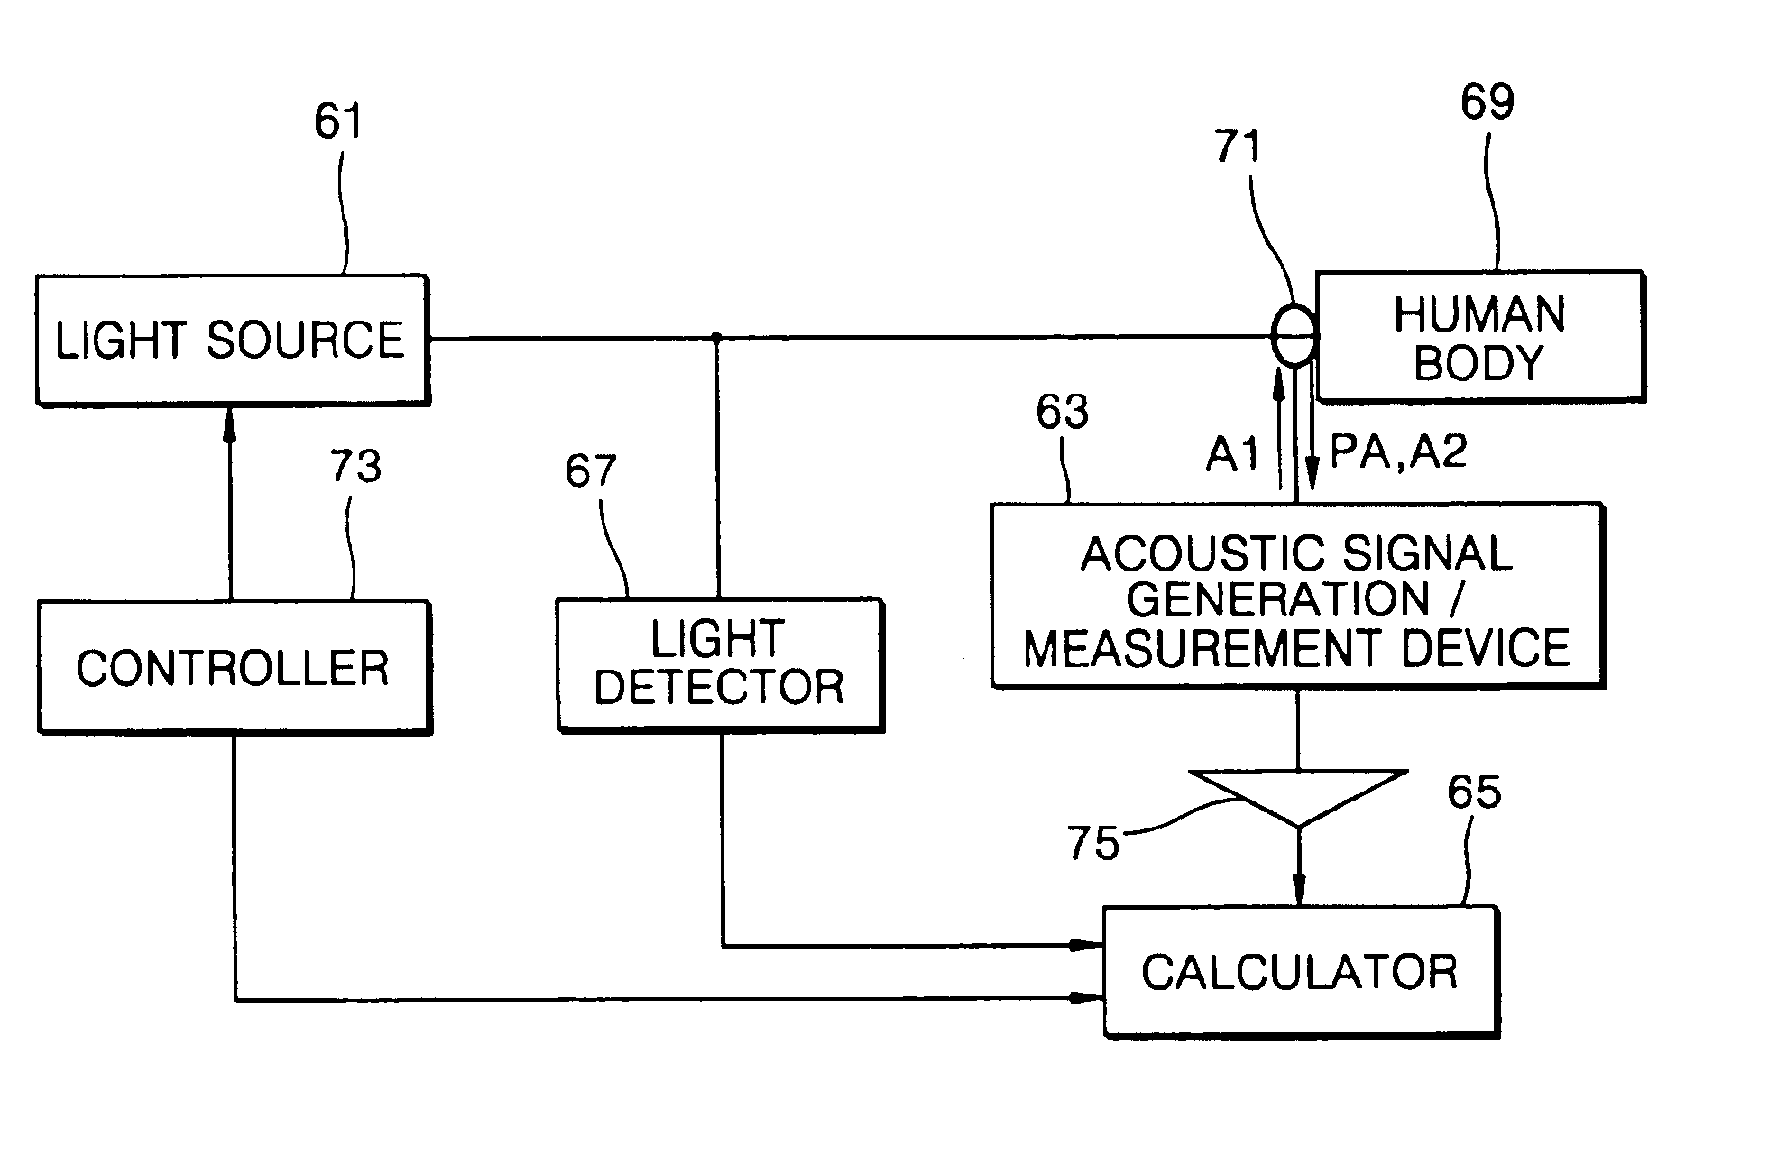 Apparatus and method for non-invasively measuring bio-fluid concentrations using photoacoustic spectroscopy